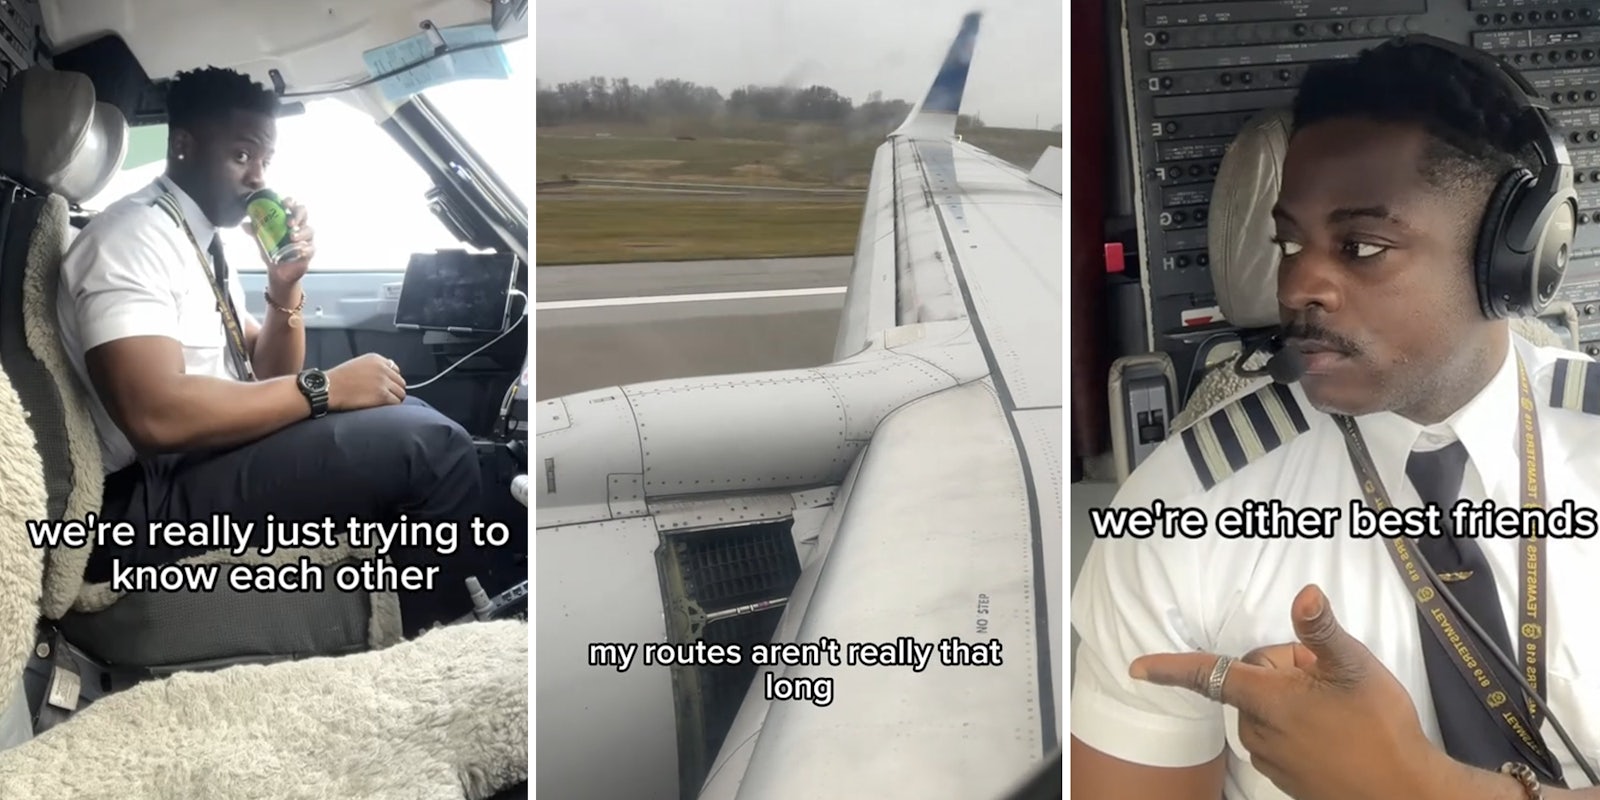 Airline pilot explains what they really do while they’re in ‘cruise’ up in the air